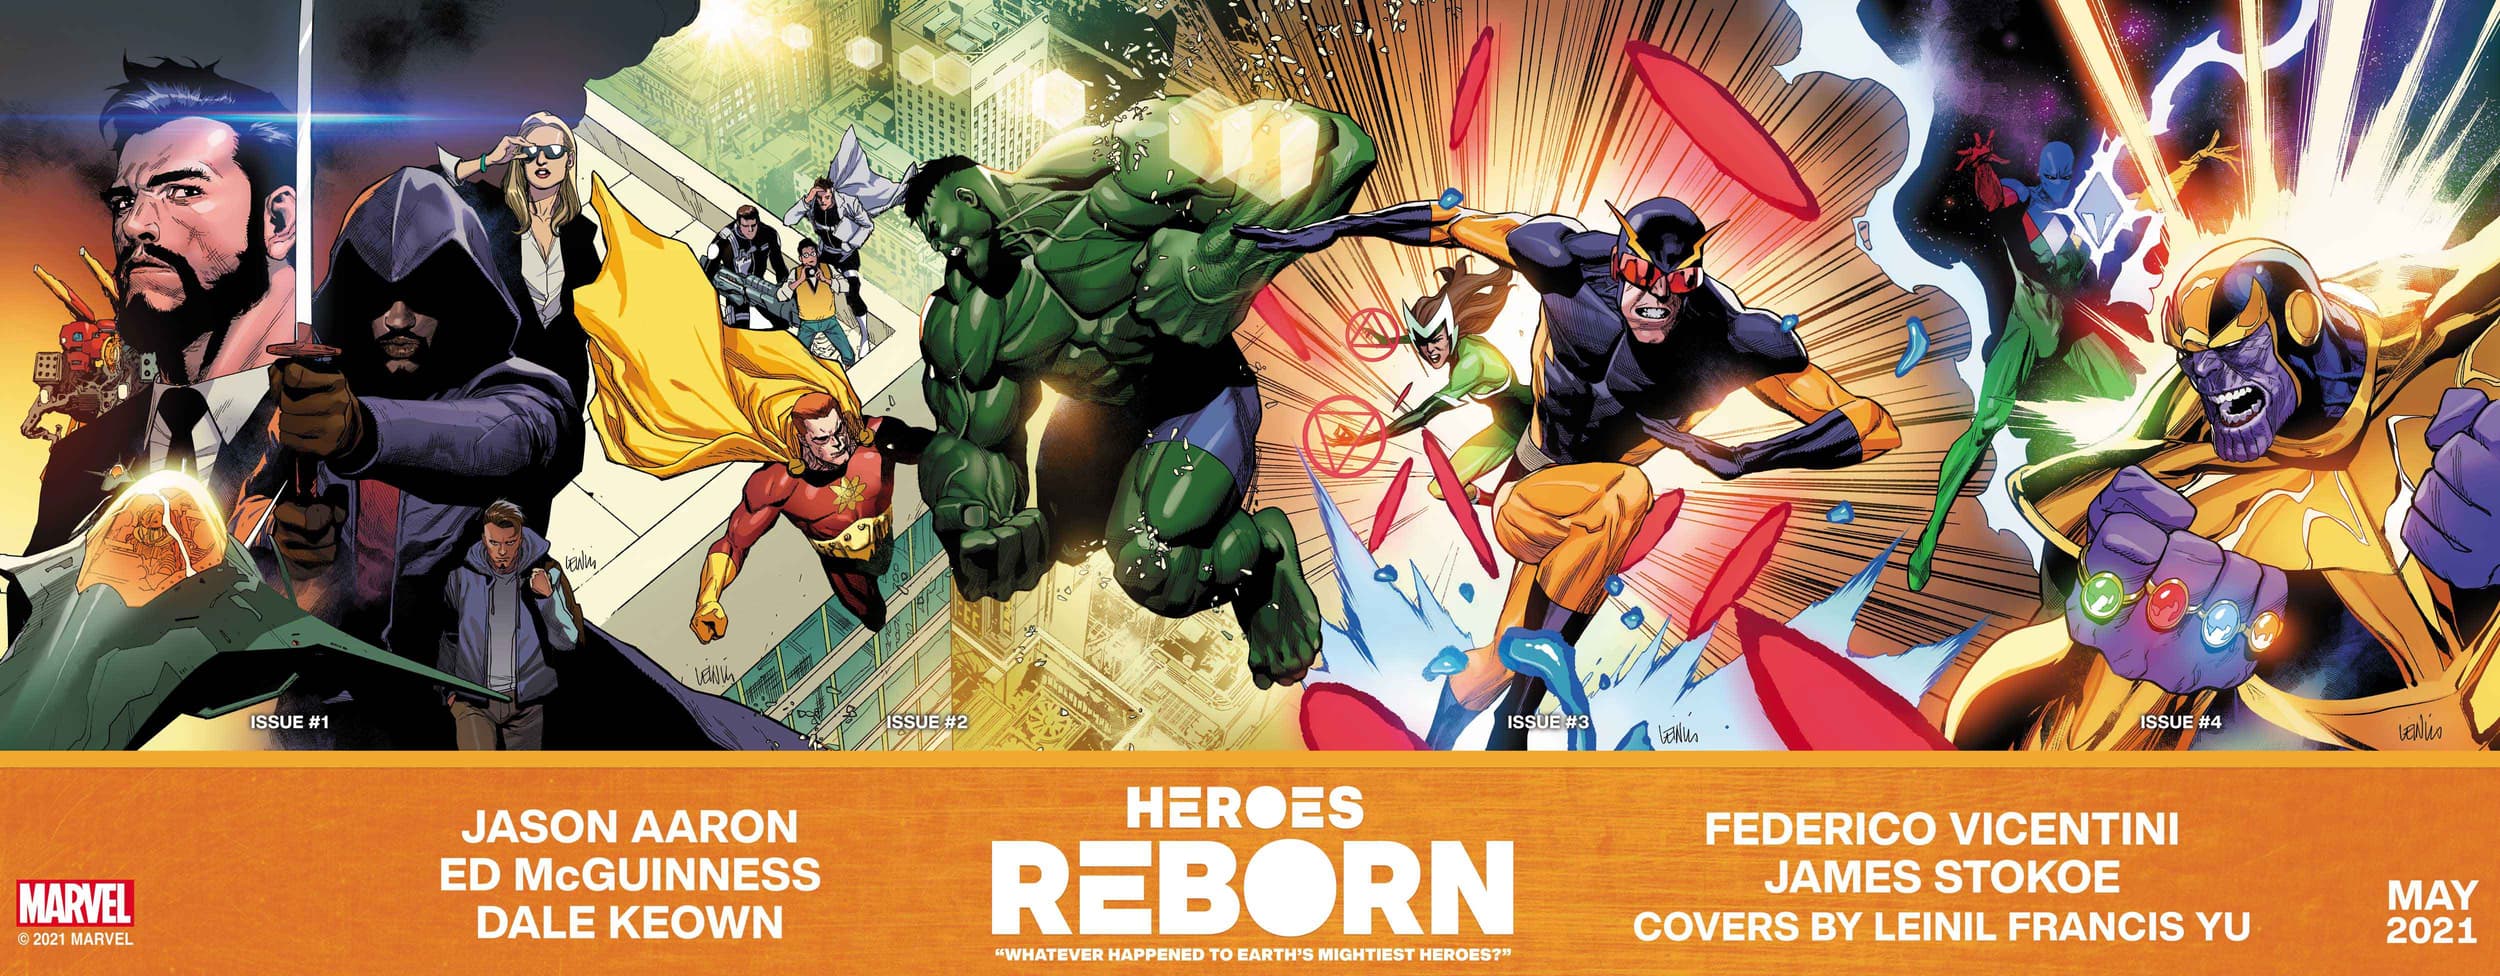 Heroes Reborn connected covers